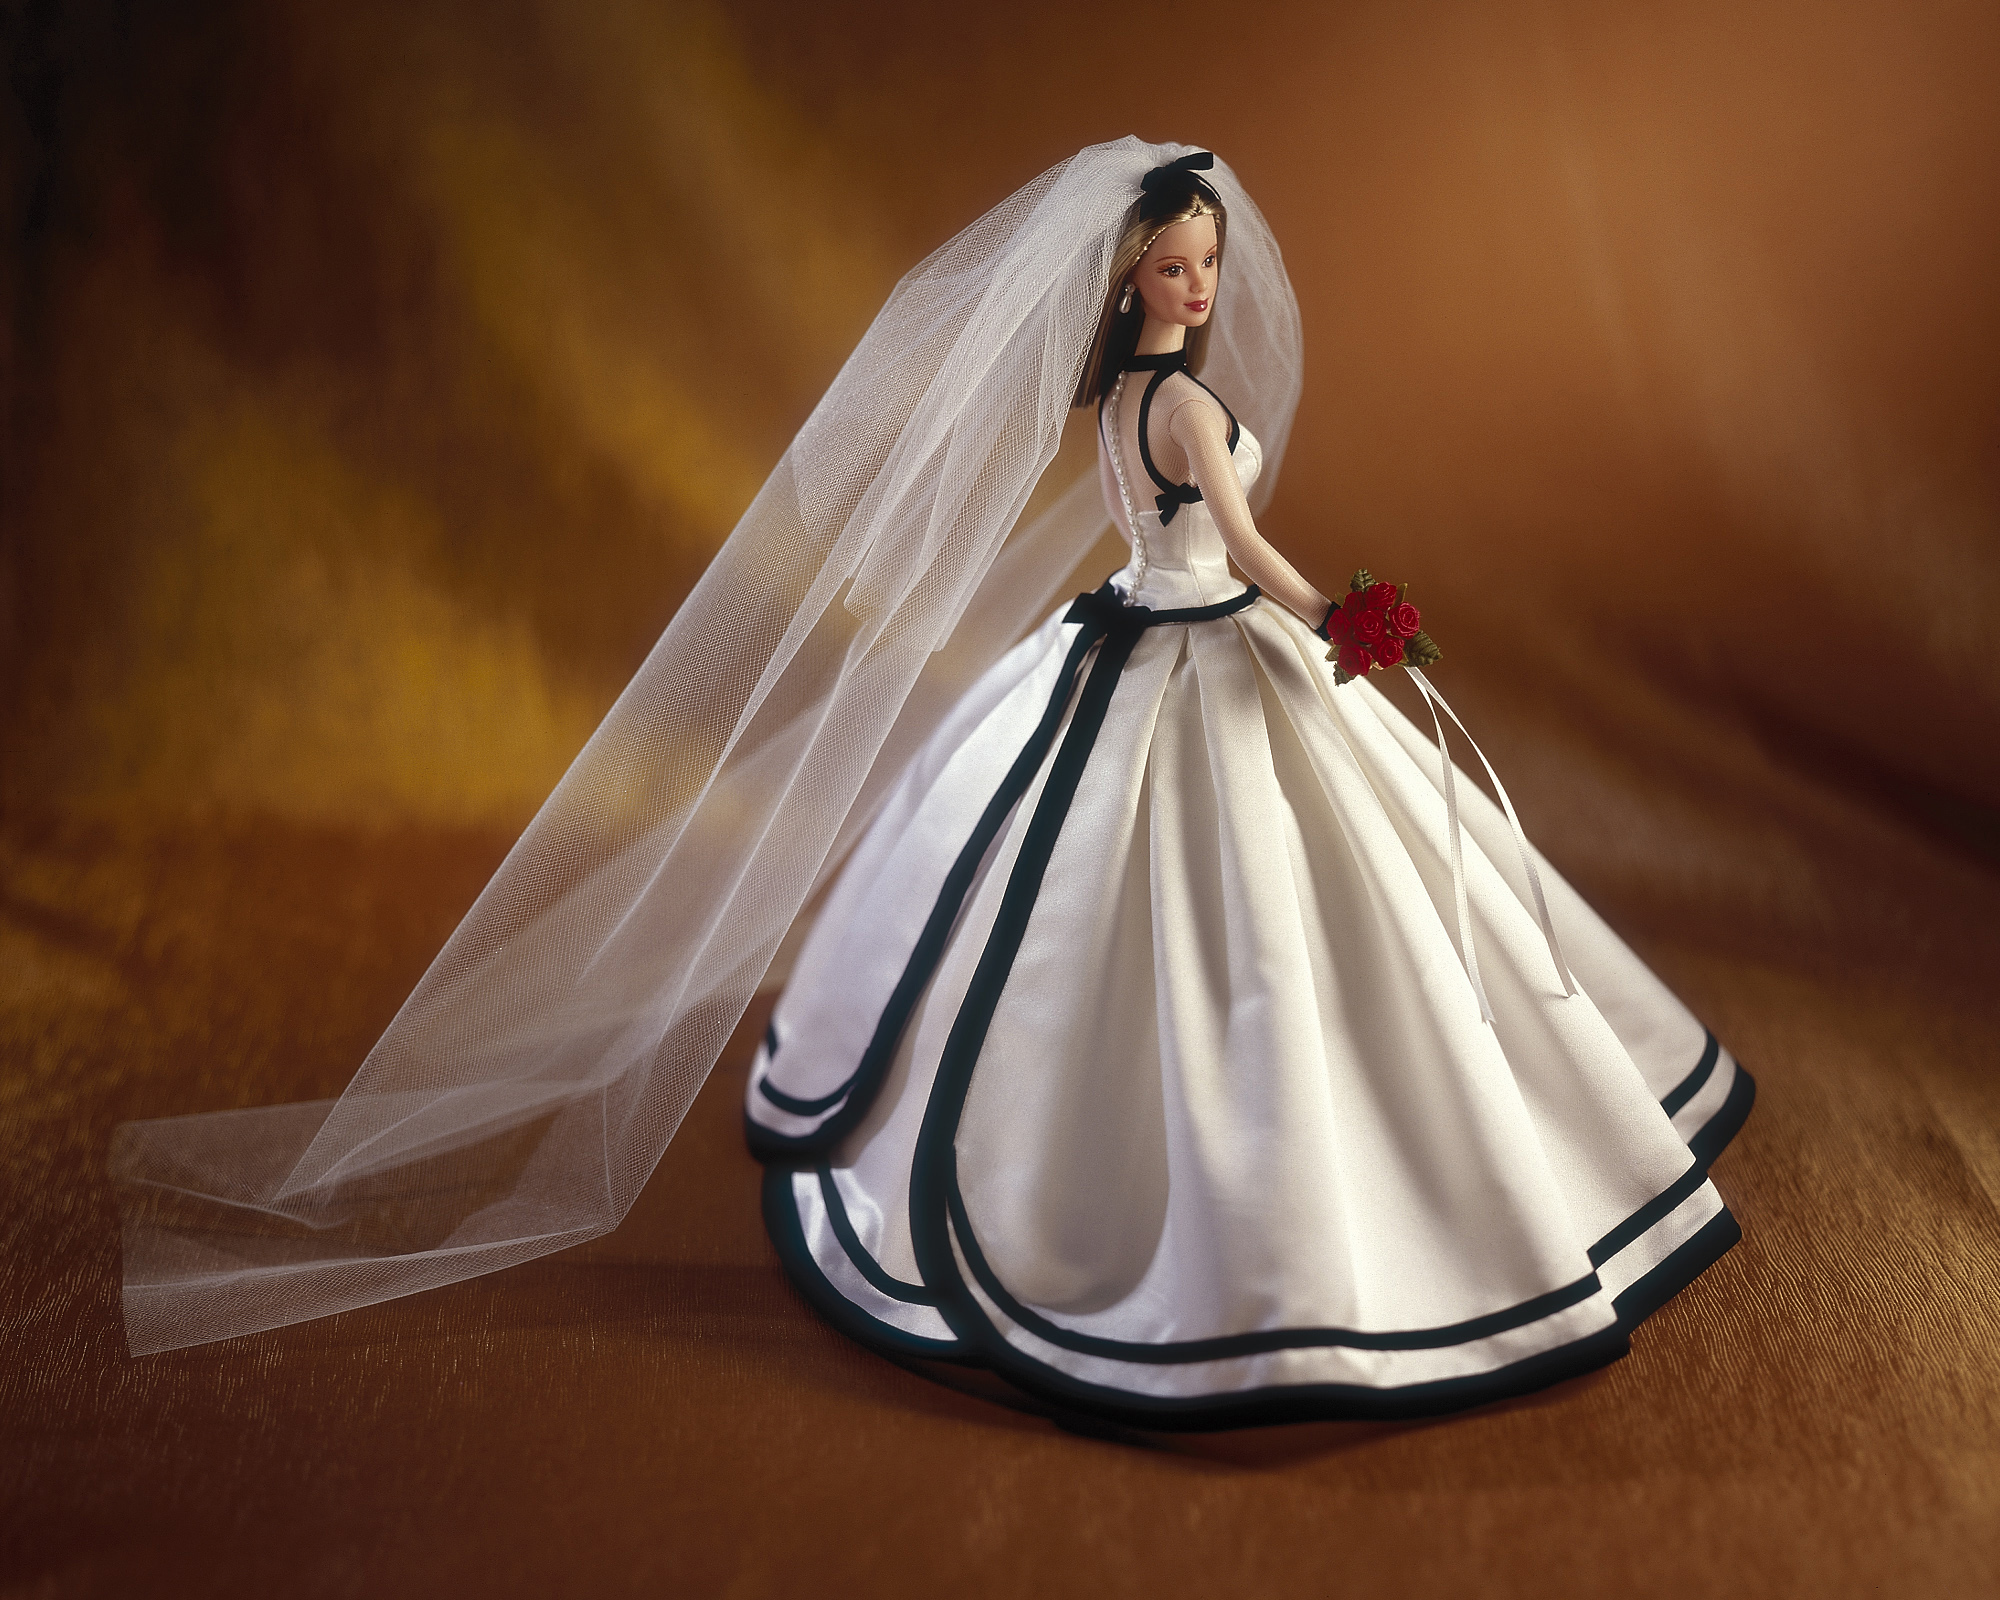 The Vera Wang Barbie Doll released in 1998.